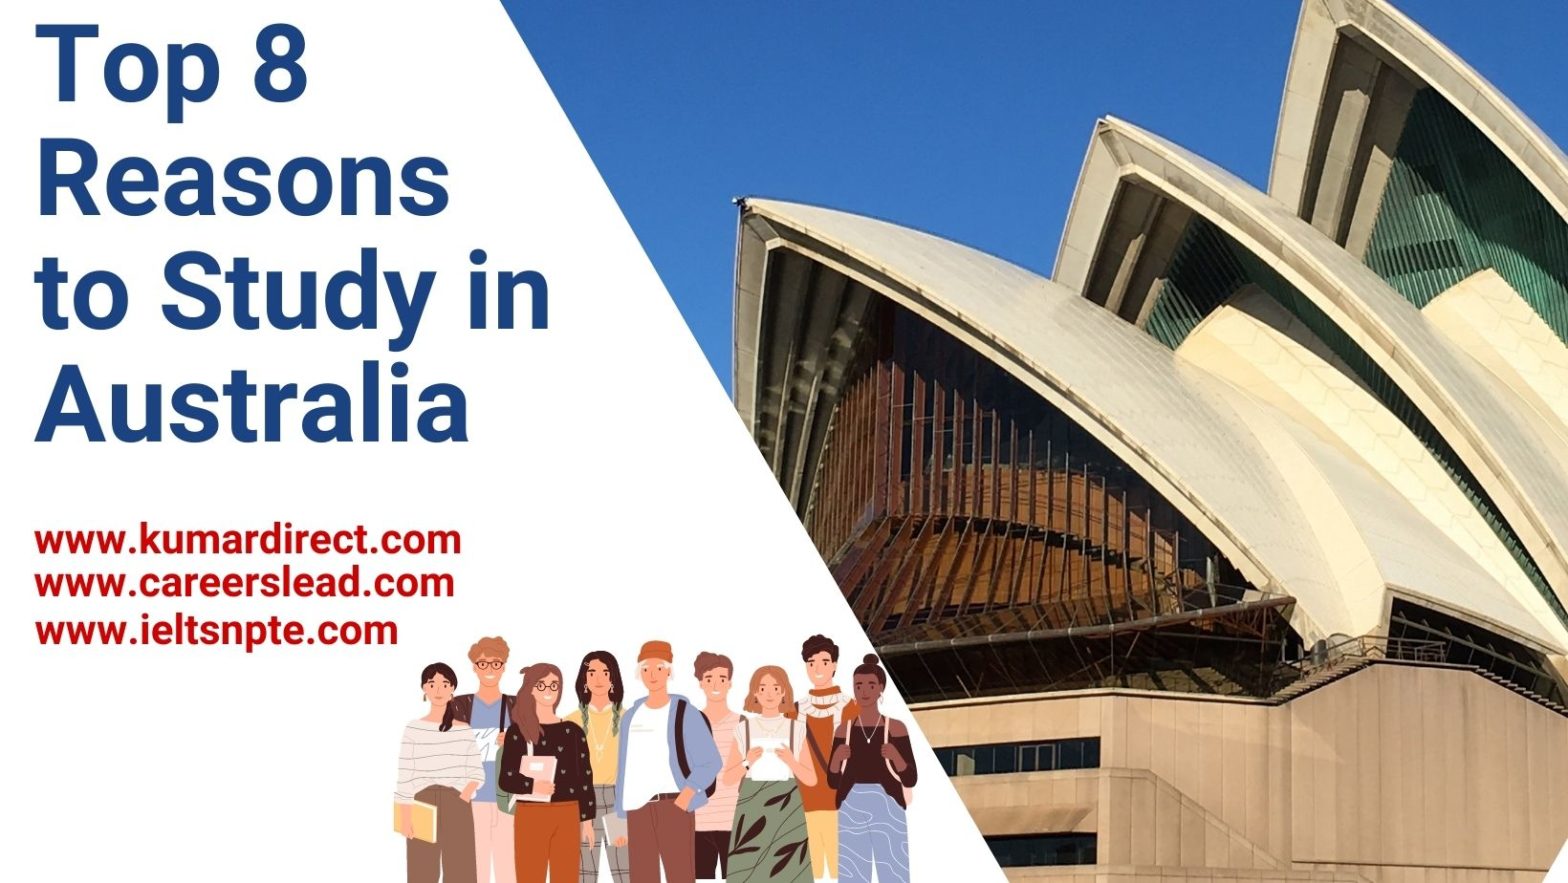 Top 8 Reasons to Study in Australia